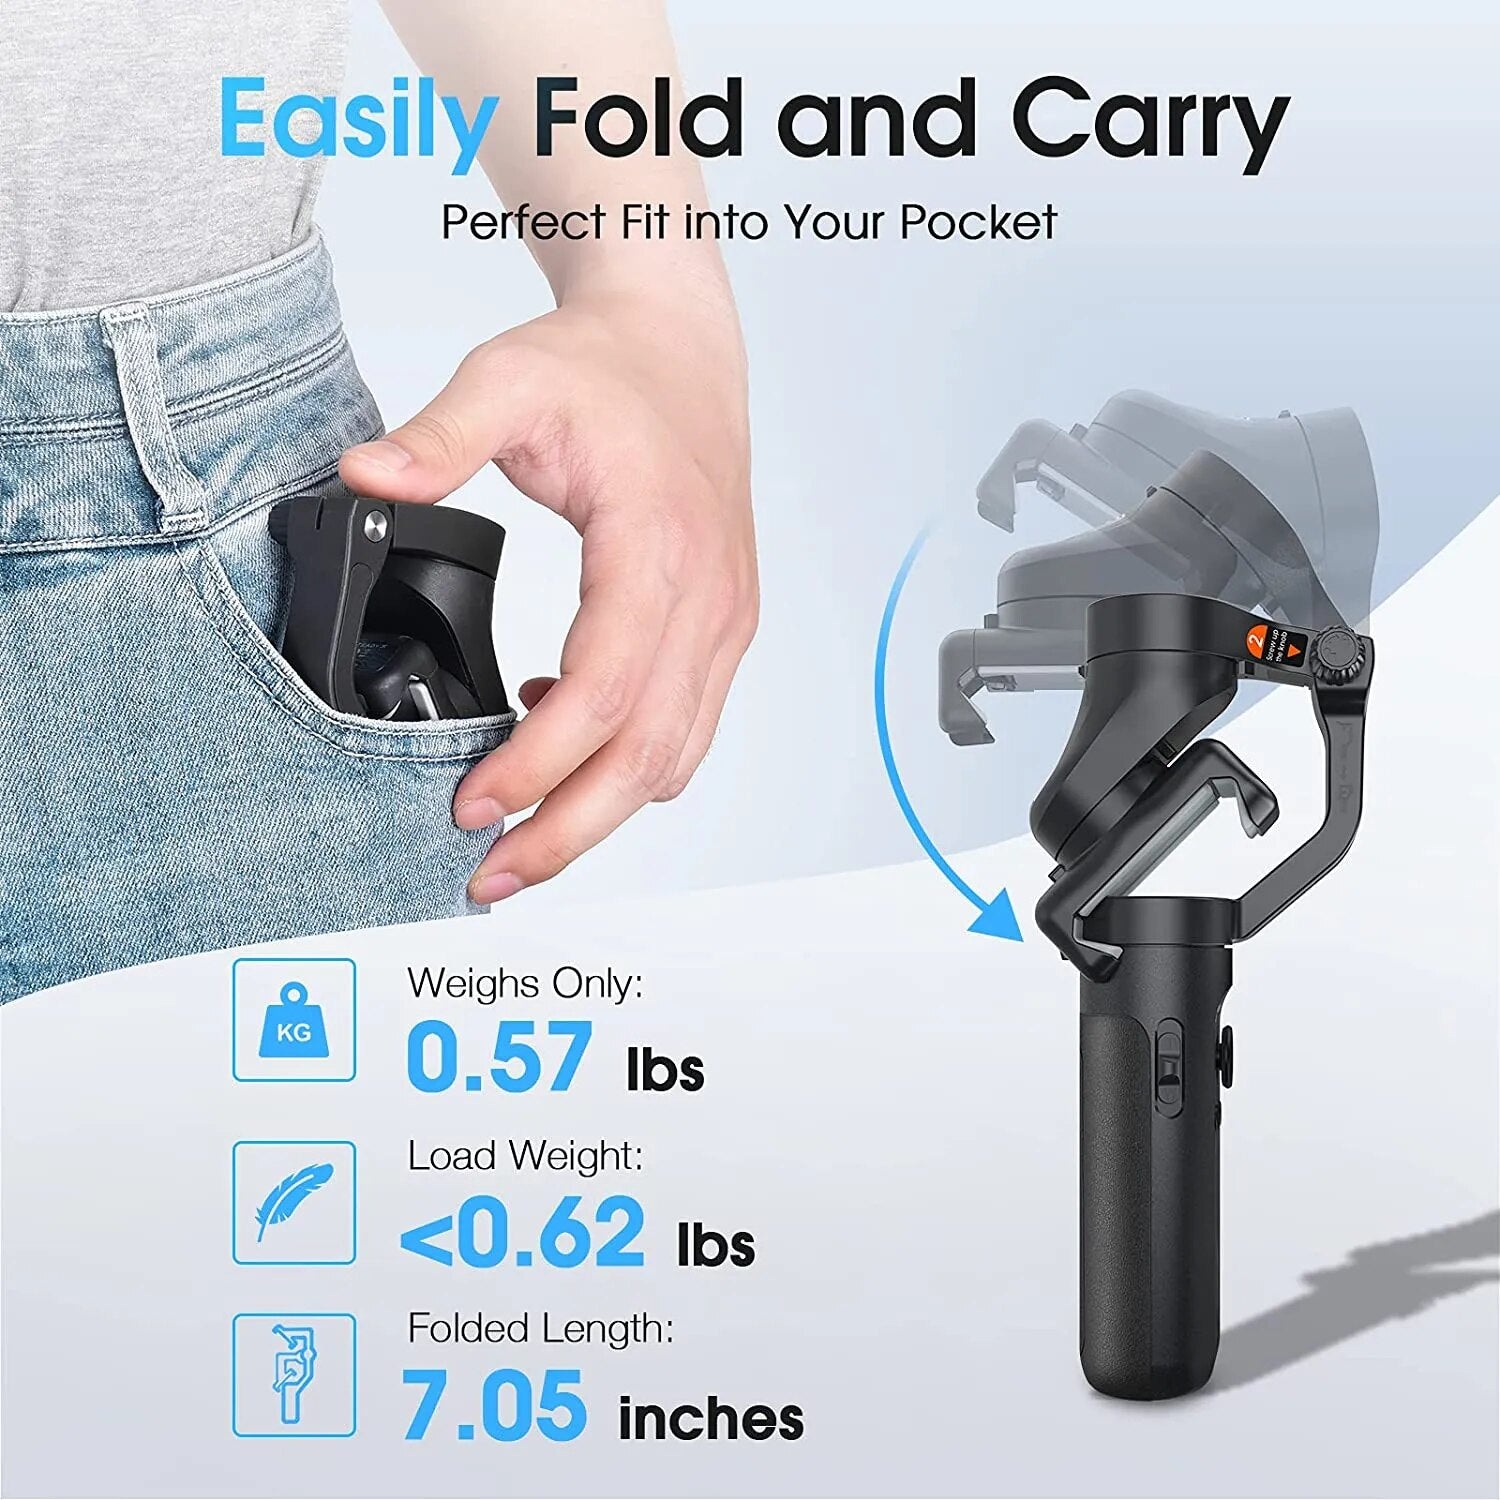 Hohem iSteady X2 Smartphone 3-Axis Gimbal with Remote Control Foldable Handheld Phone Stabilizer for iPhone/Samsung/Huawei